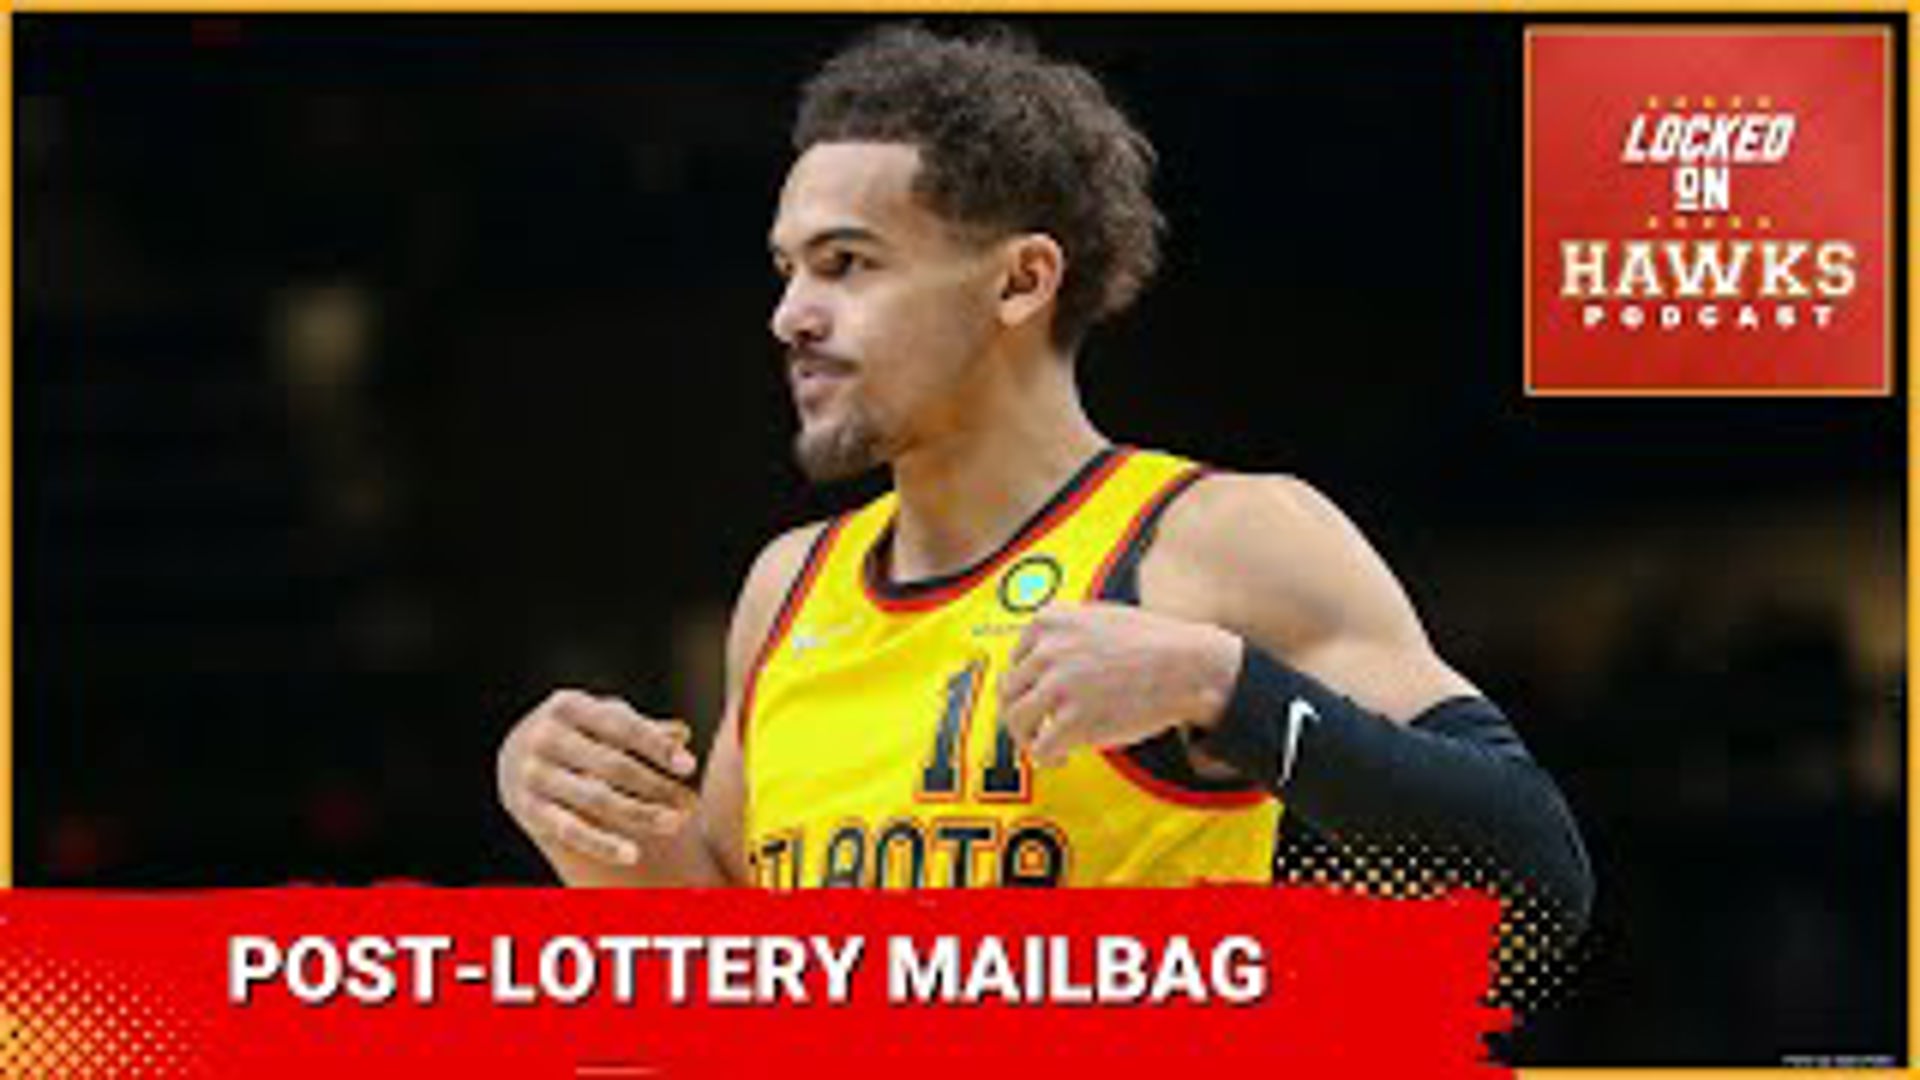 Brad Rowland hosts episode No. 1716 of the Locked on Hawks podcast. The show touches on mailbag questions on the Atlanta Hawks holding the No. 1 pick.